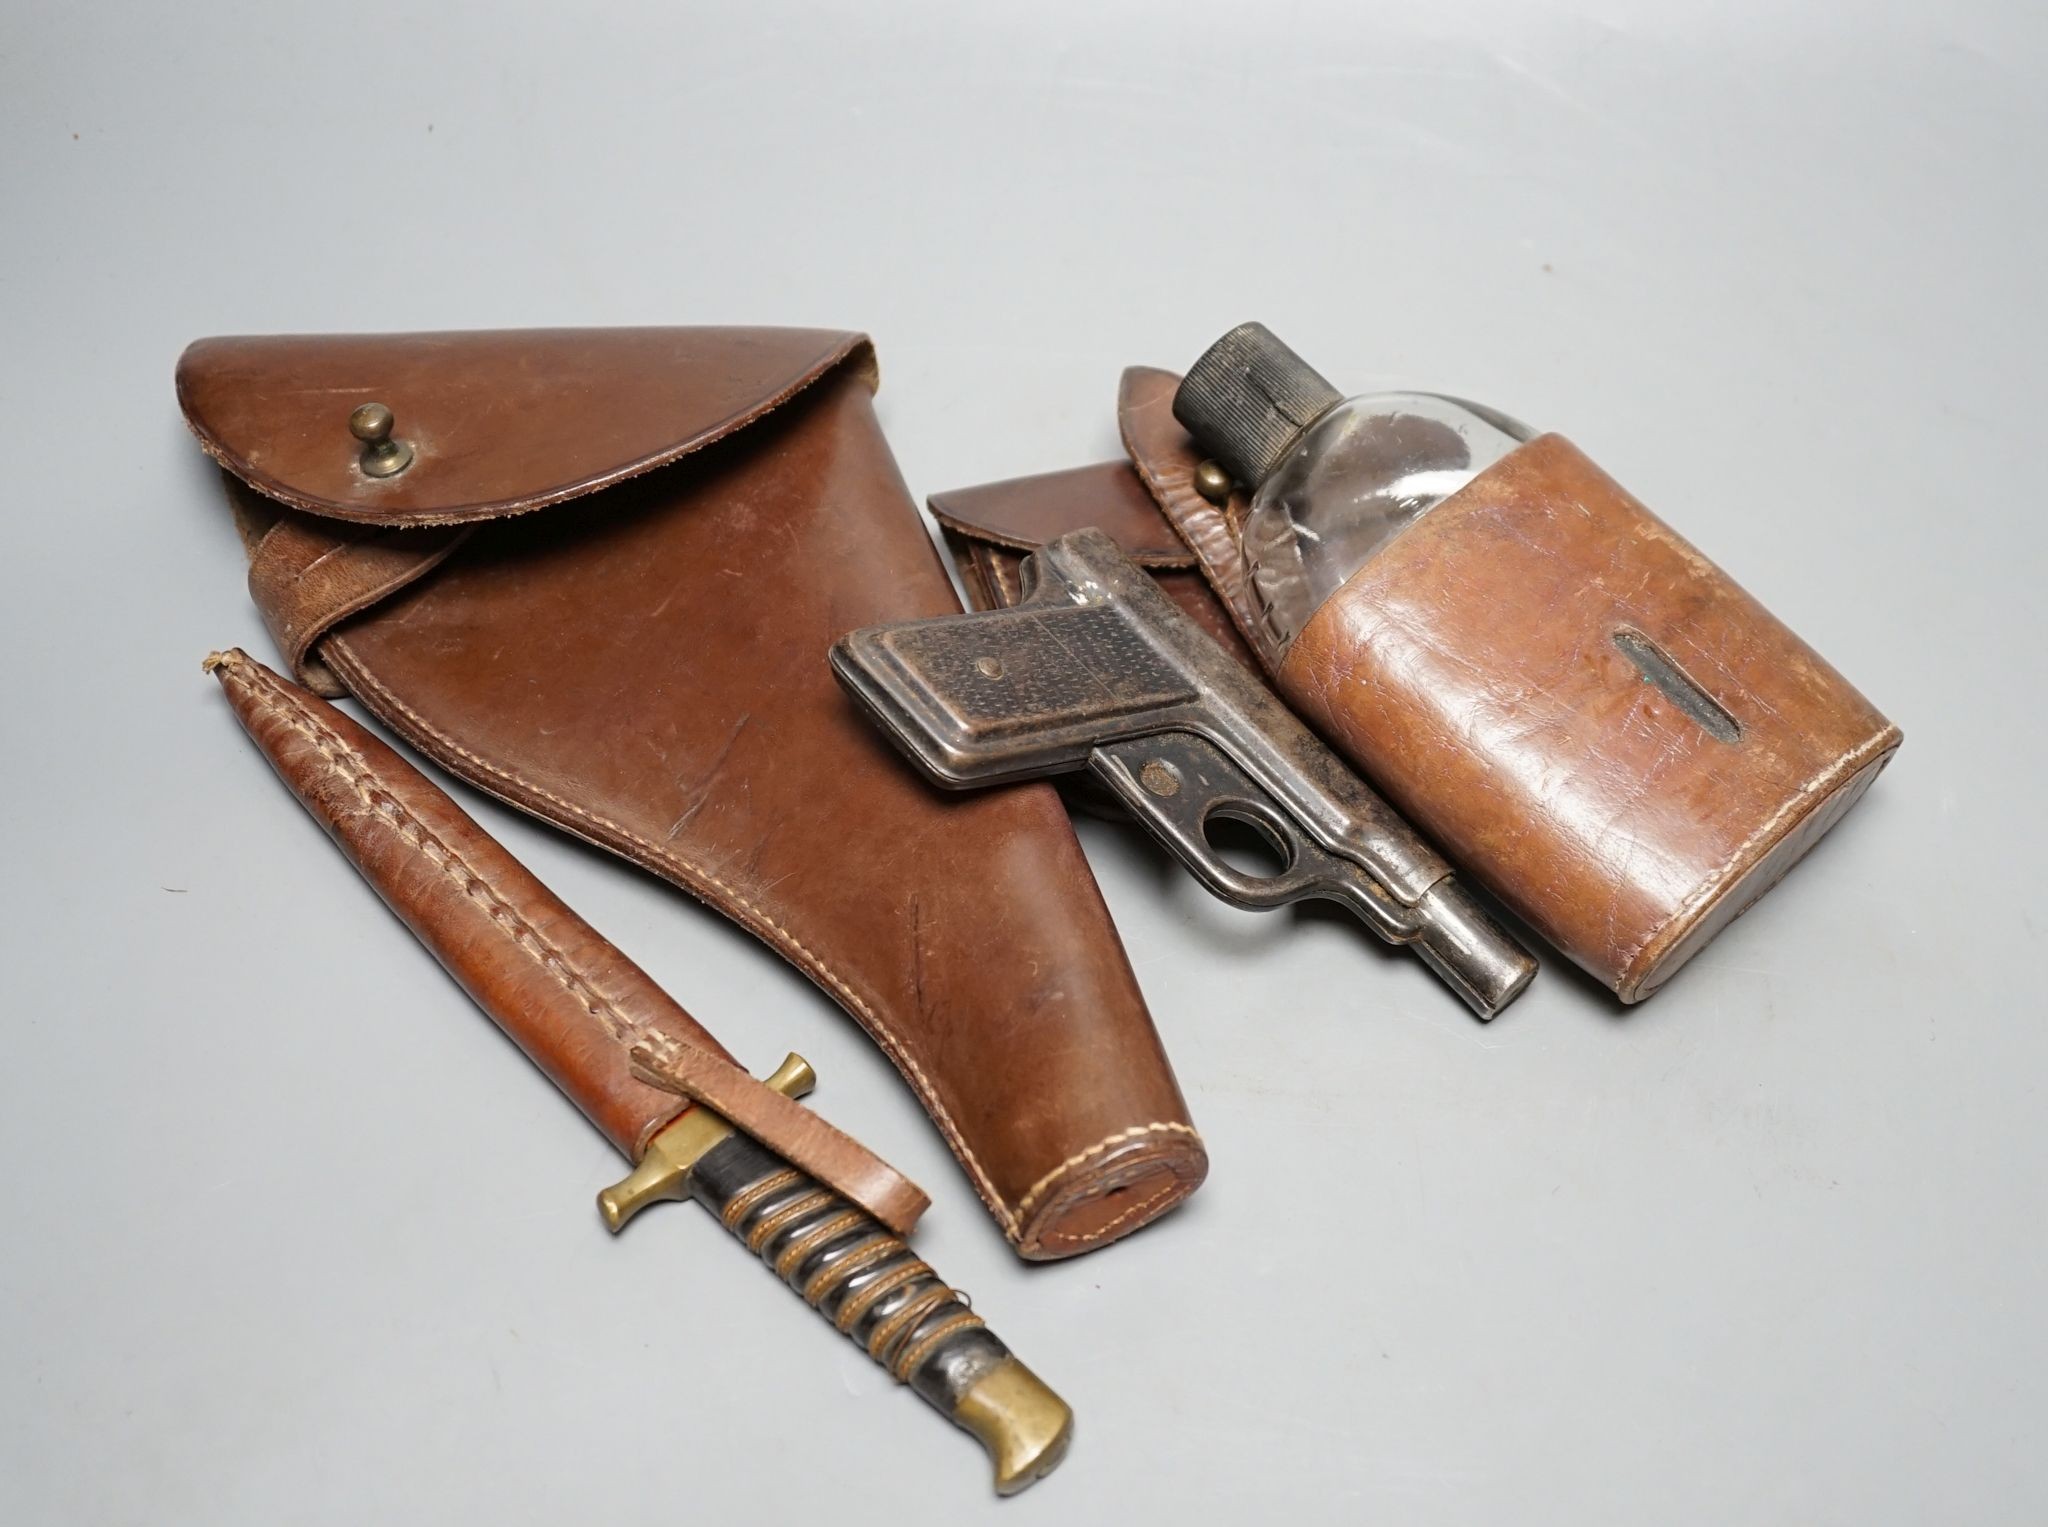 WWI leather accessories including hip flask and dagger, 12cm